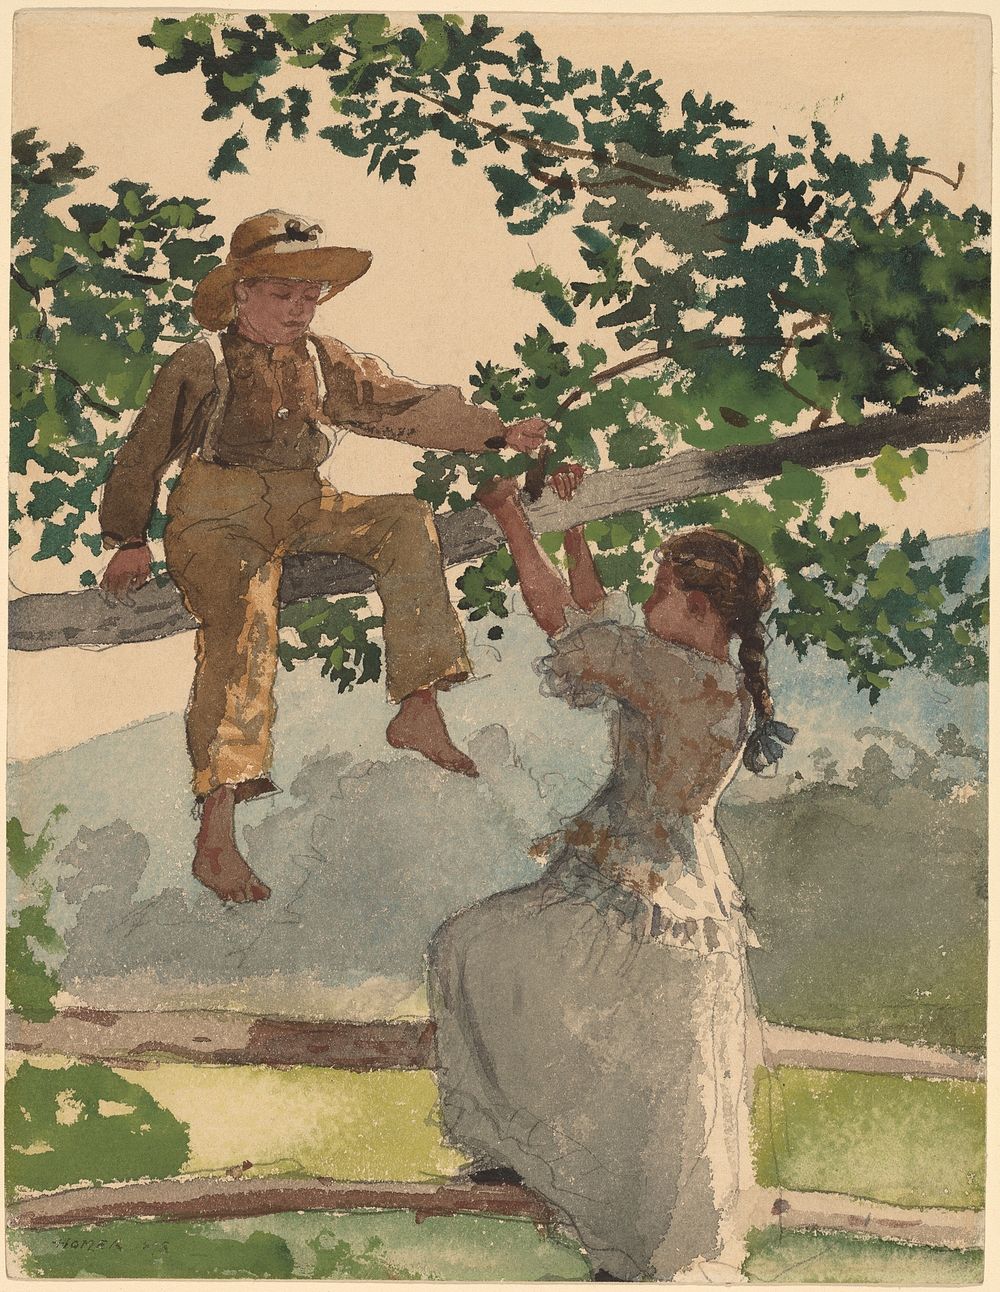 On the Fence (1878) by Winslow Homer.  